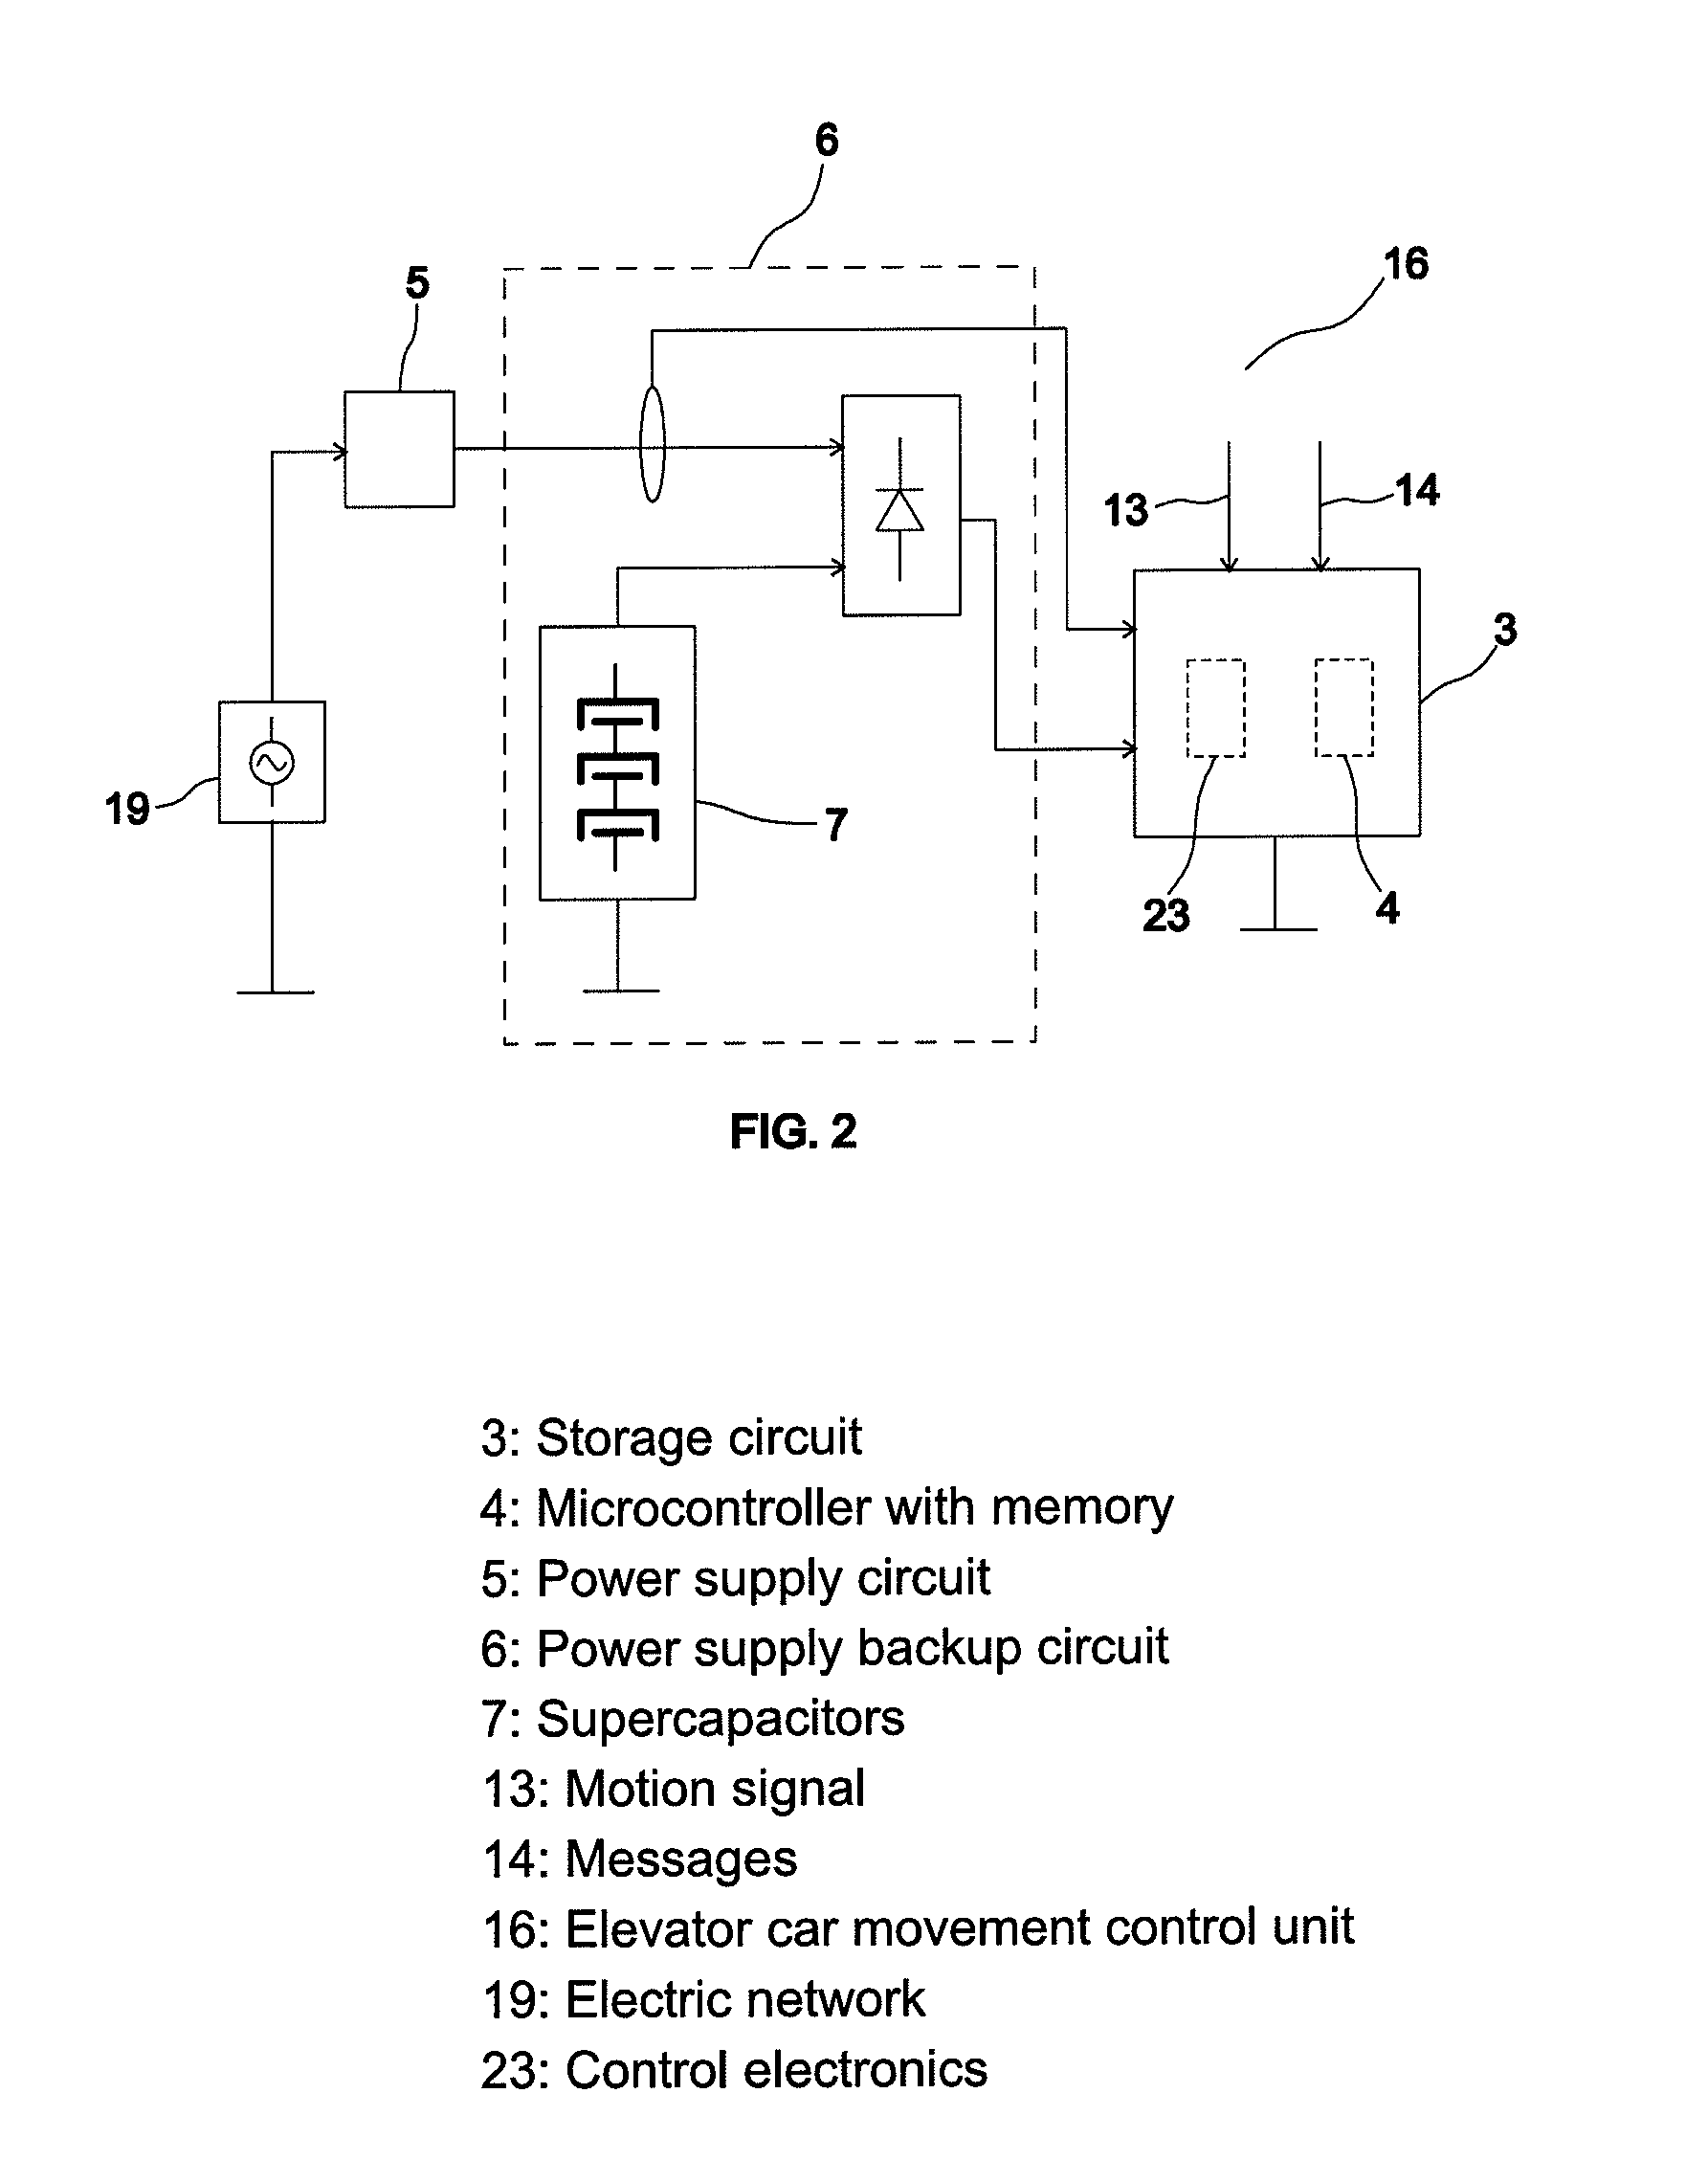 Transportation system with capacitive energy storage and non-volatile memory for storing the operational state of the transportation system upon detection of the operational anomaly in power